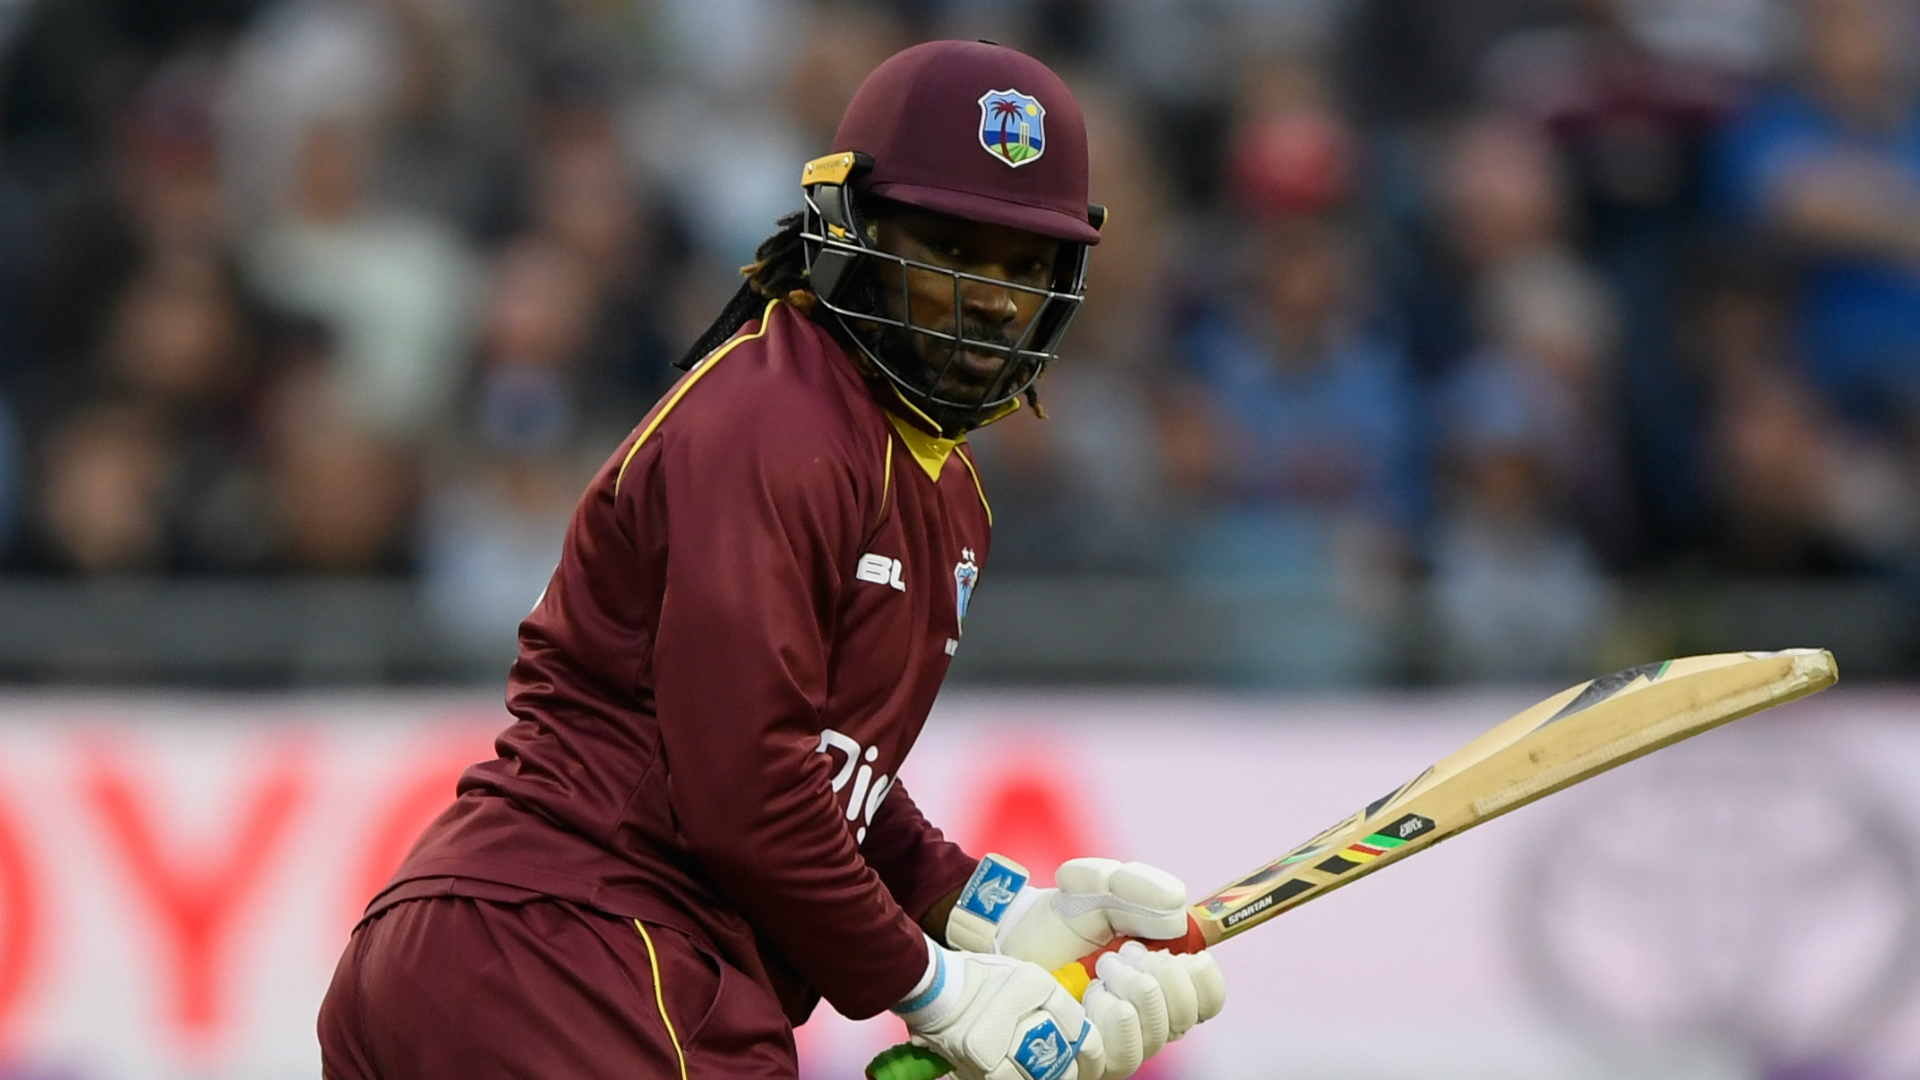 Cricket West Indies has announced Chris Gayle will step away from one-day cricket following the World Cup.